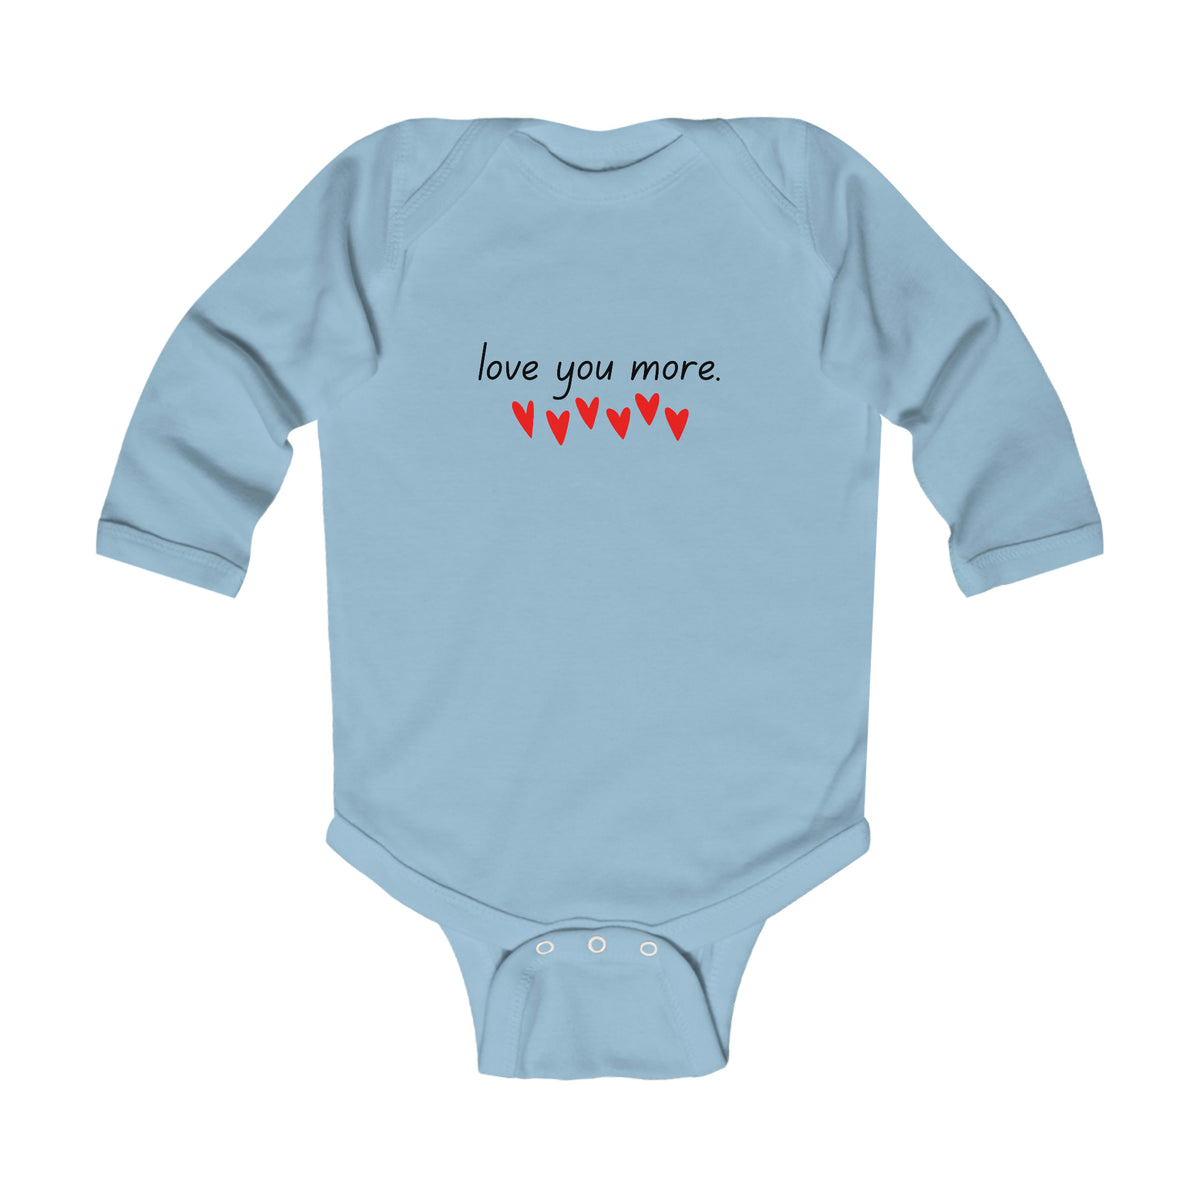 Love You More Infant Long Sleeve Bodysuit, Baby Valentines Onesie, Vday Heart Baby Shirt, Matching Family Vday Shirts